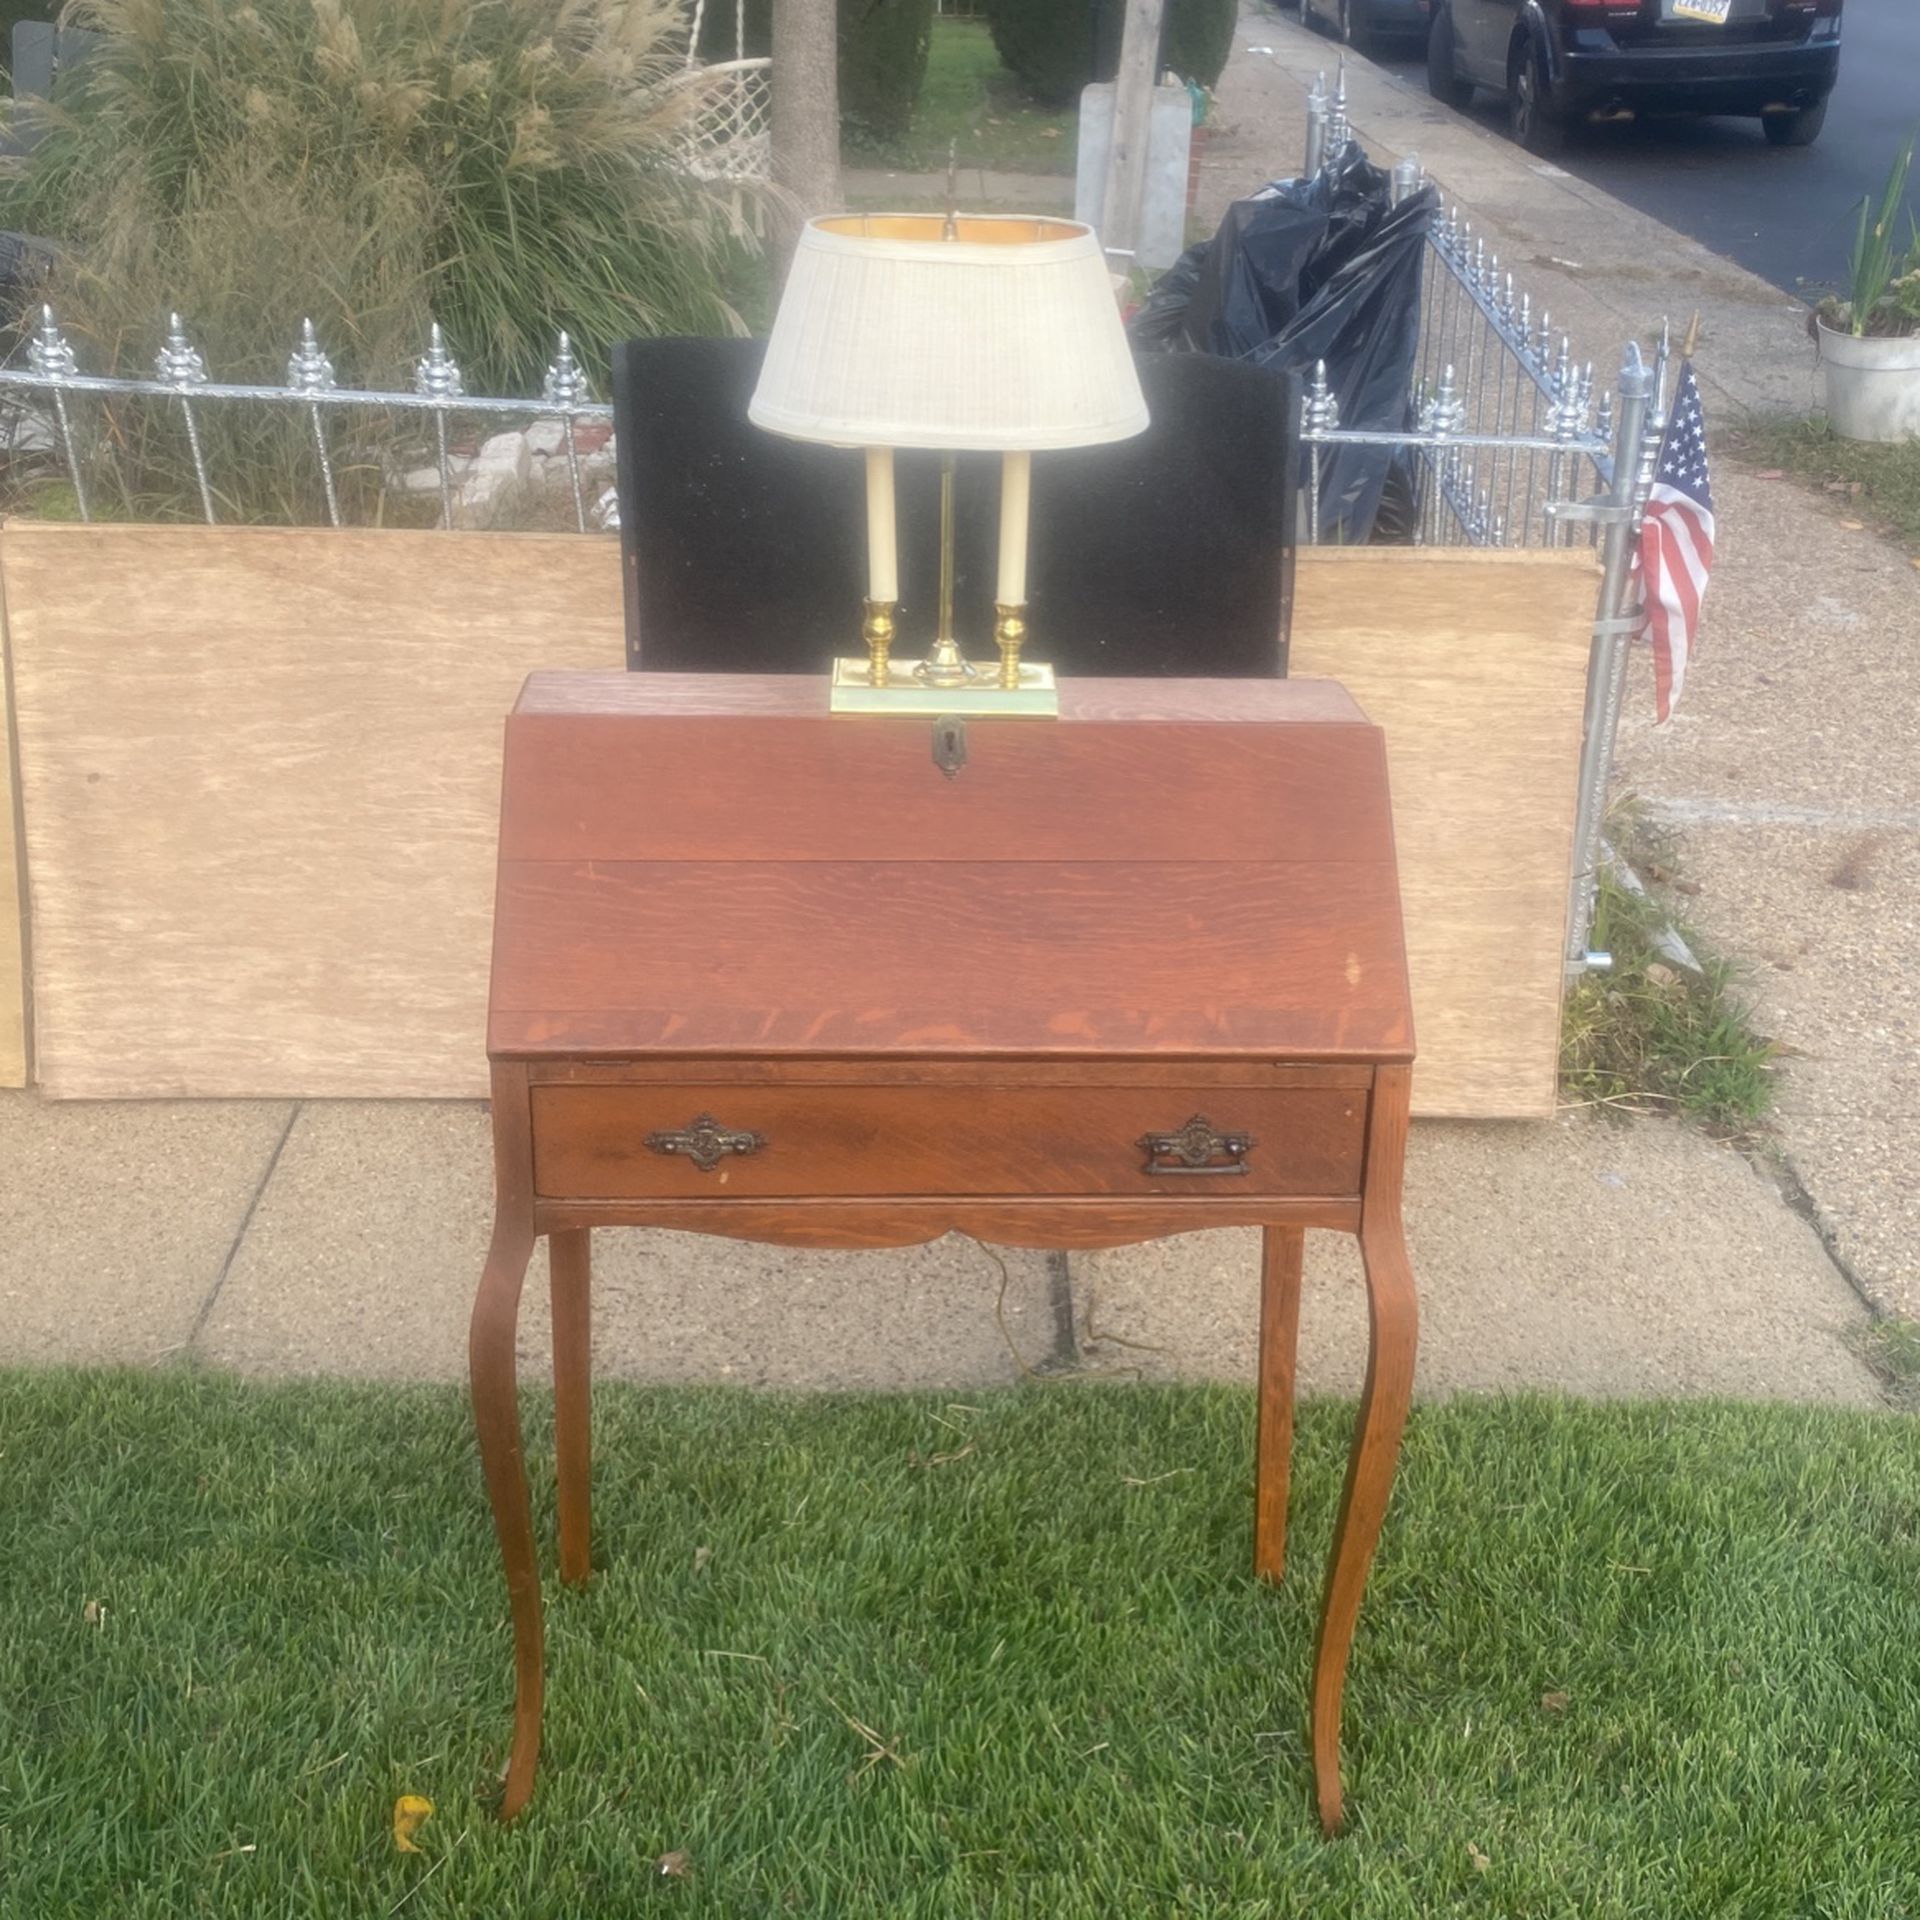   Antique desk with lamp $35 Take ALL👍🏾